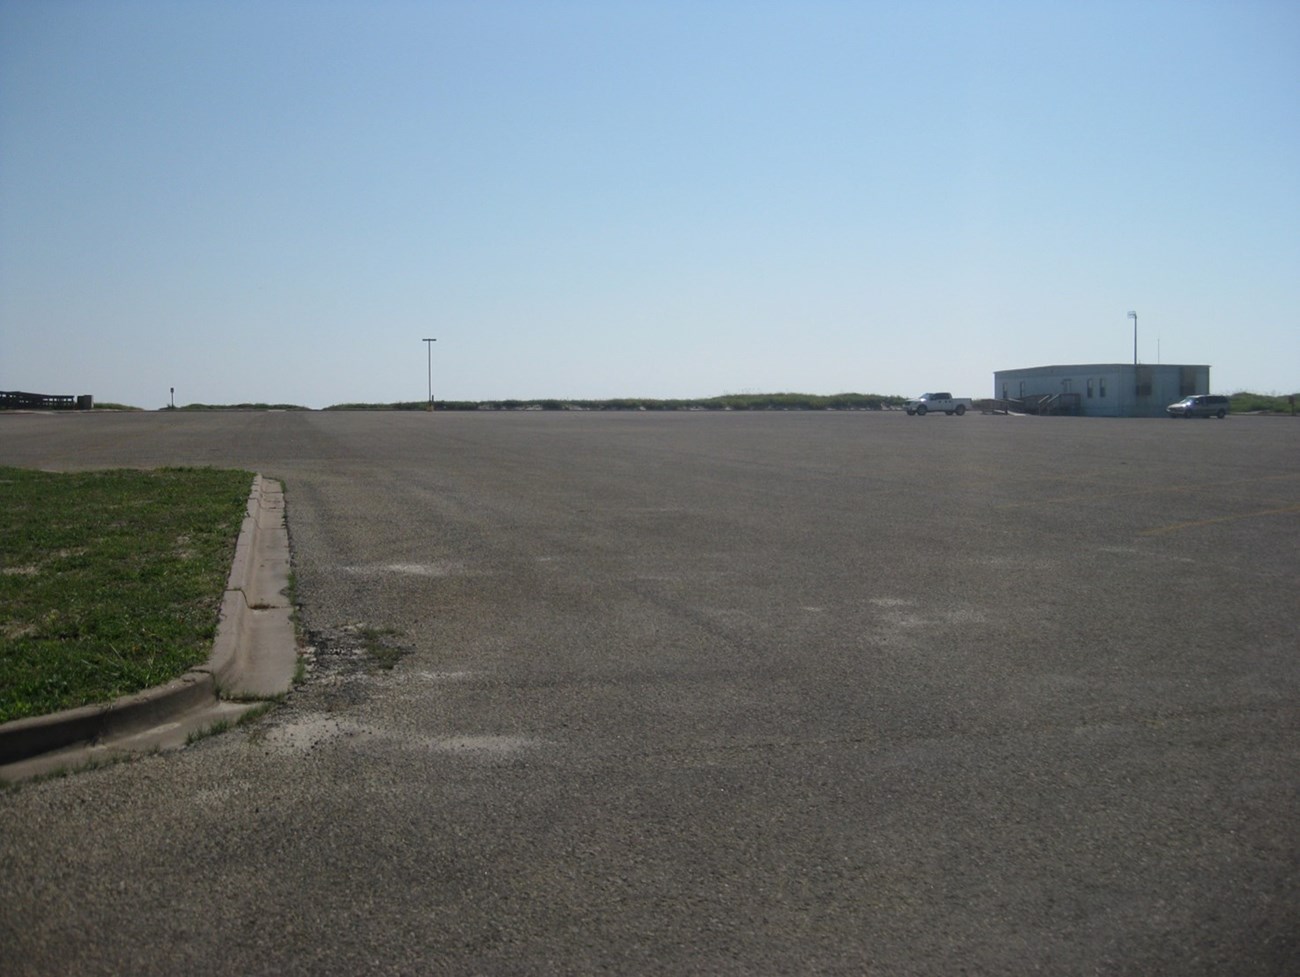 A large open parking lot with a small building on the far side.